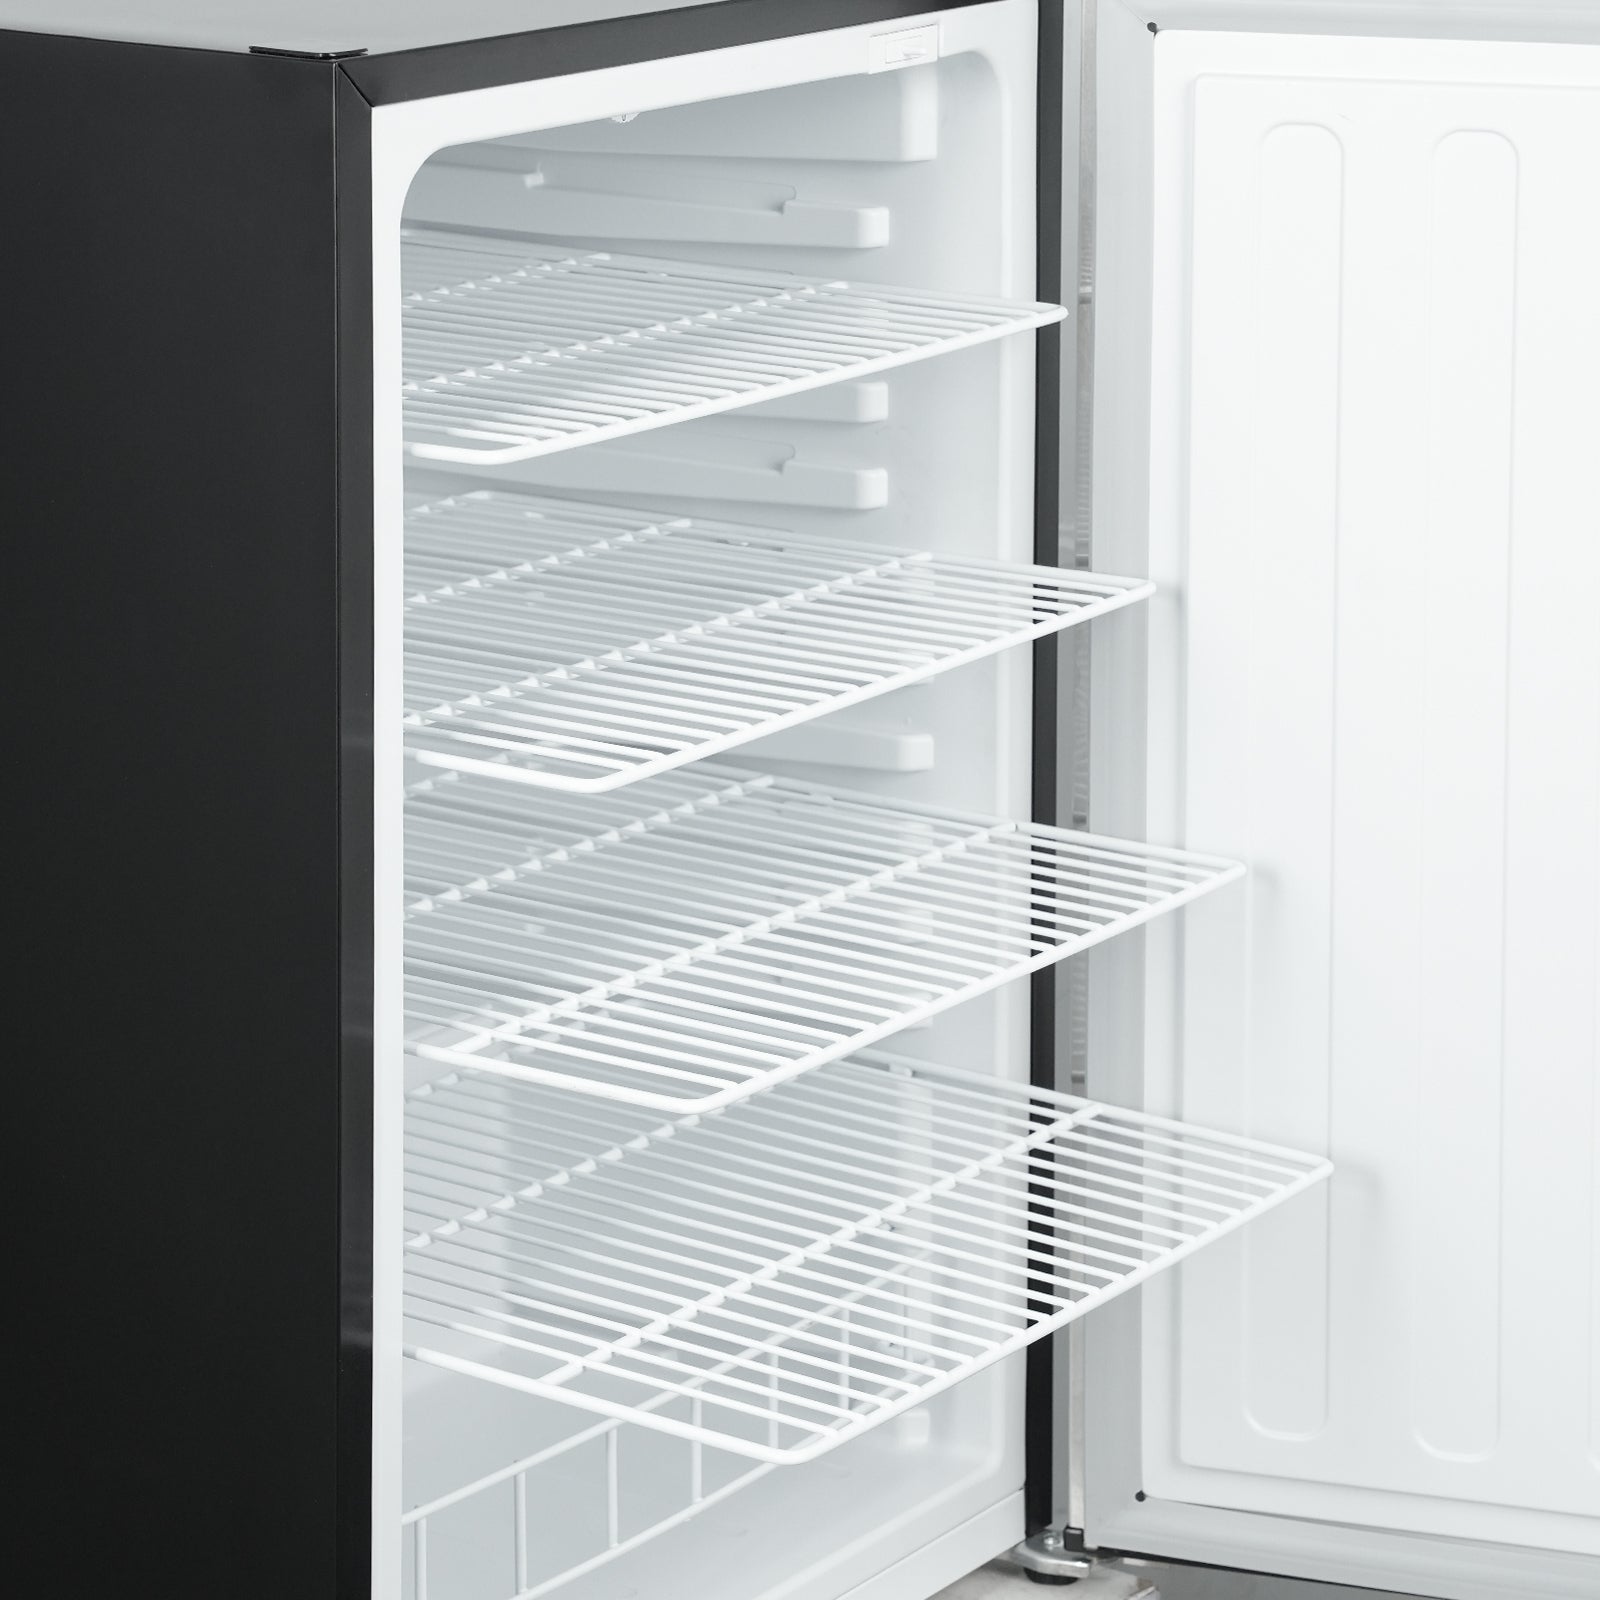 Close-up view of a 4.1 Cu Ft Stainless Steel Outdoor Beverage Fridge 156 cans with the door open, showcasing four wire shelves arranged in a way that highlights their adjustable feature